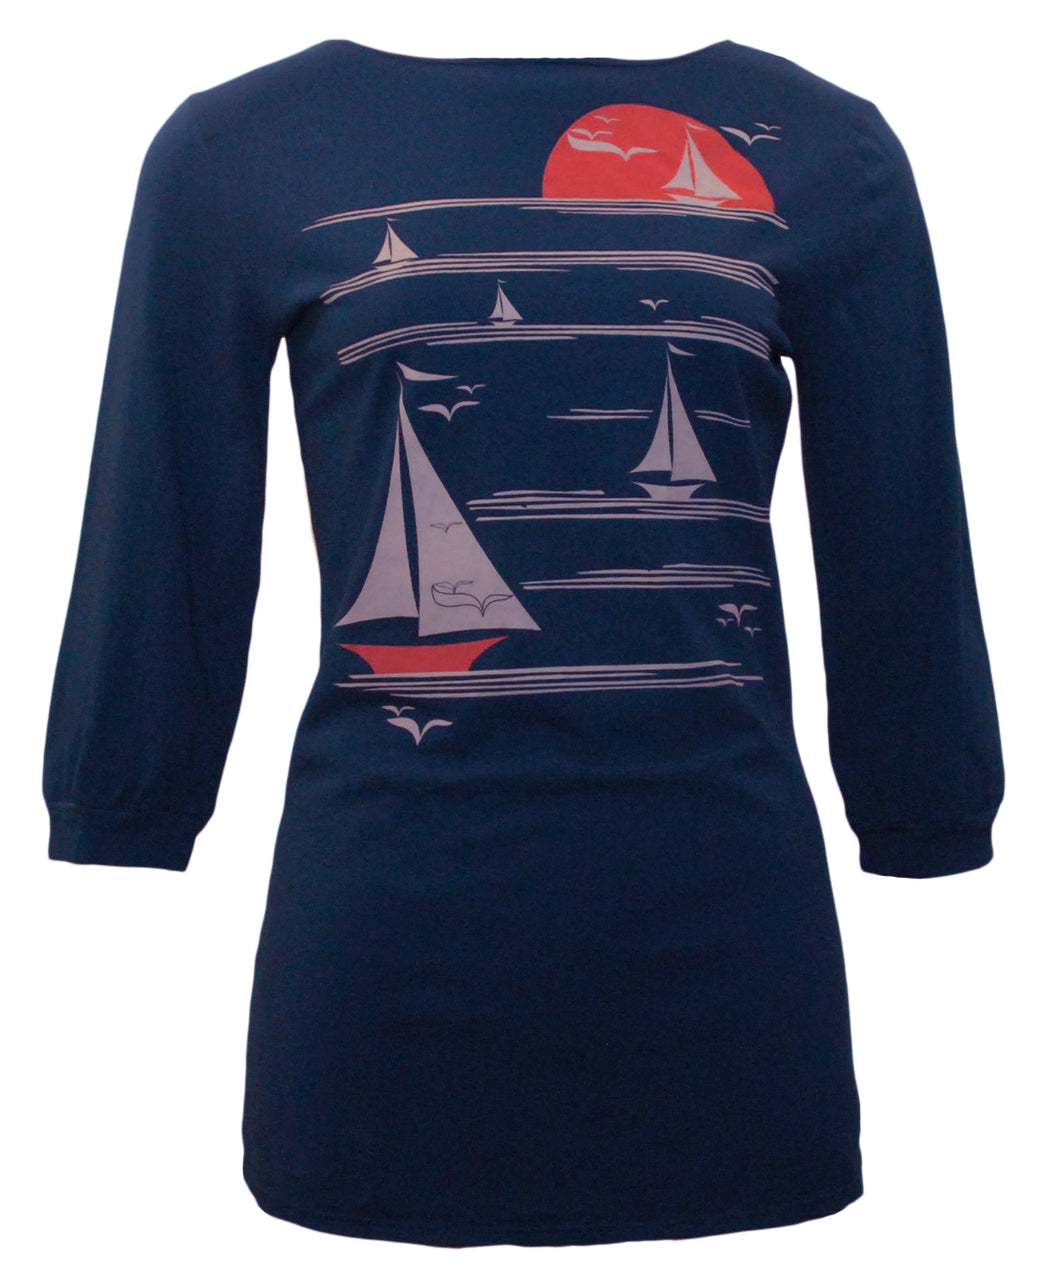 Long sleeve blue shirt with graphic of boats on the water at sunset